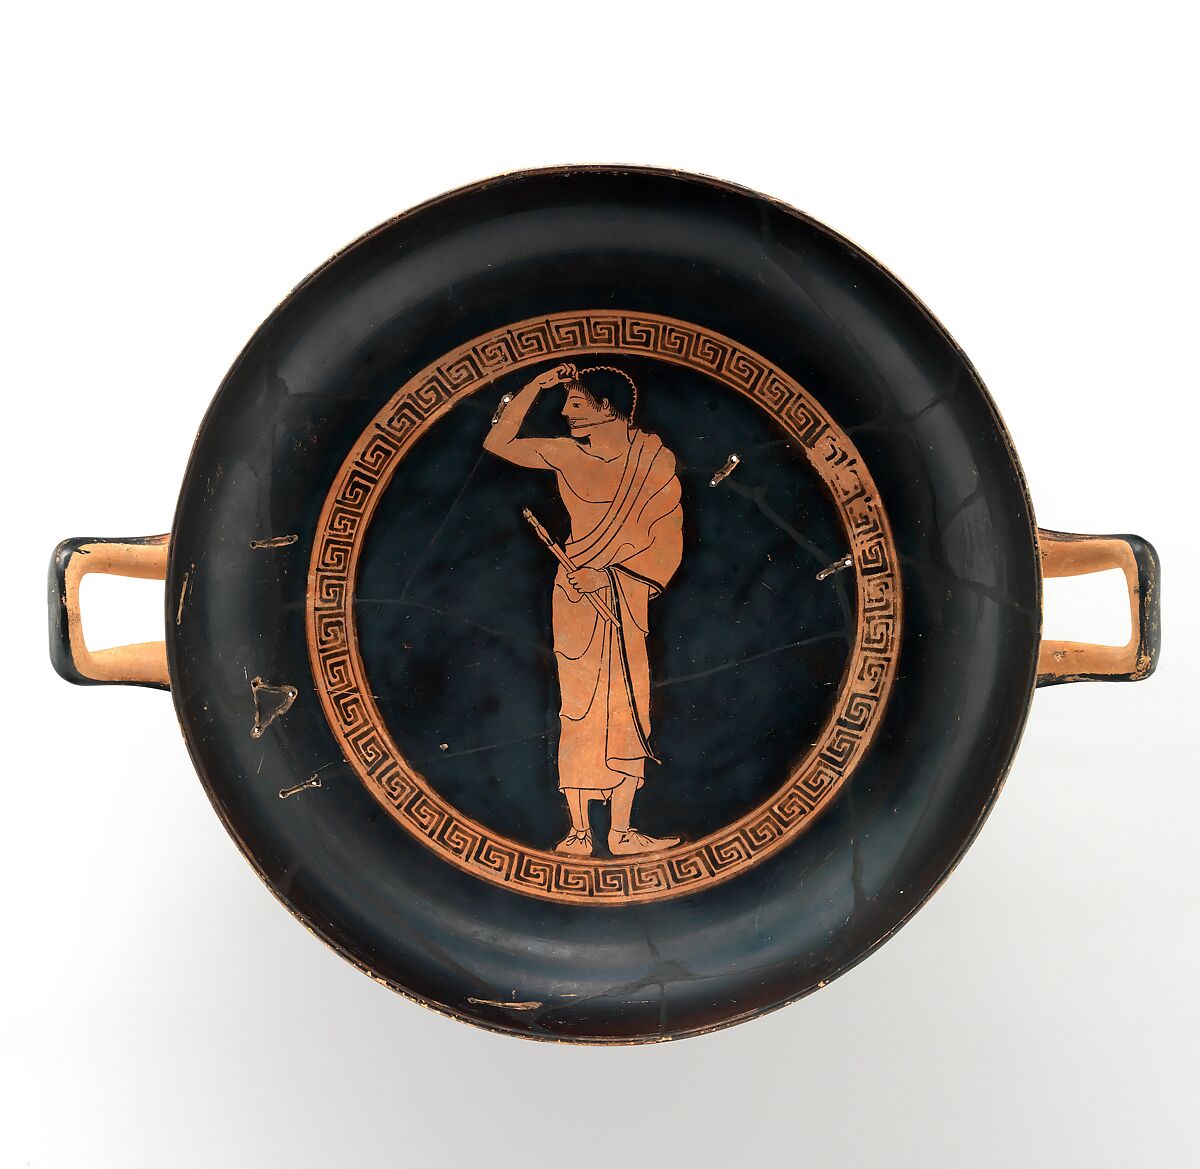 Terracotta kylix (drinking cup), Attributed to the Antiphon Painter, Terracotta, Greek, Attic 